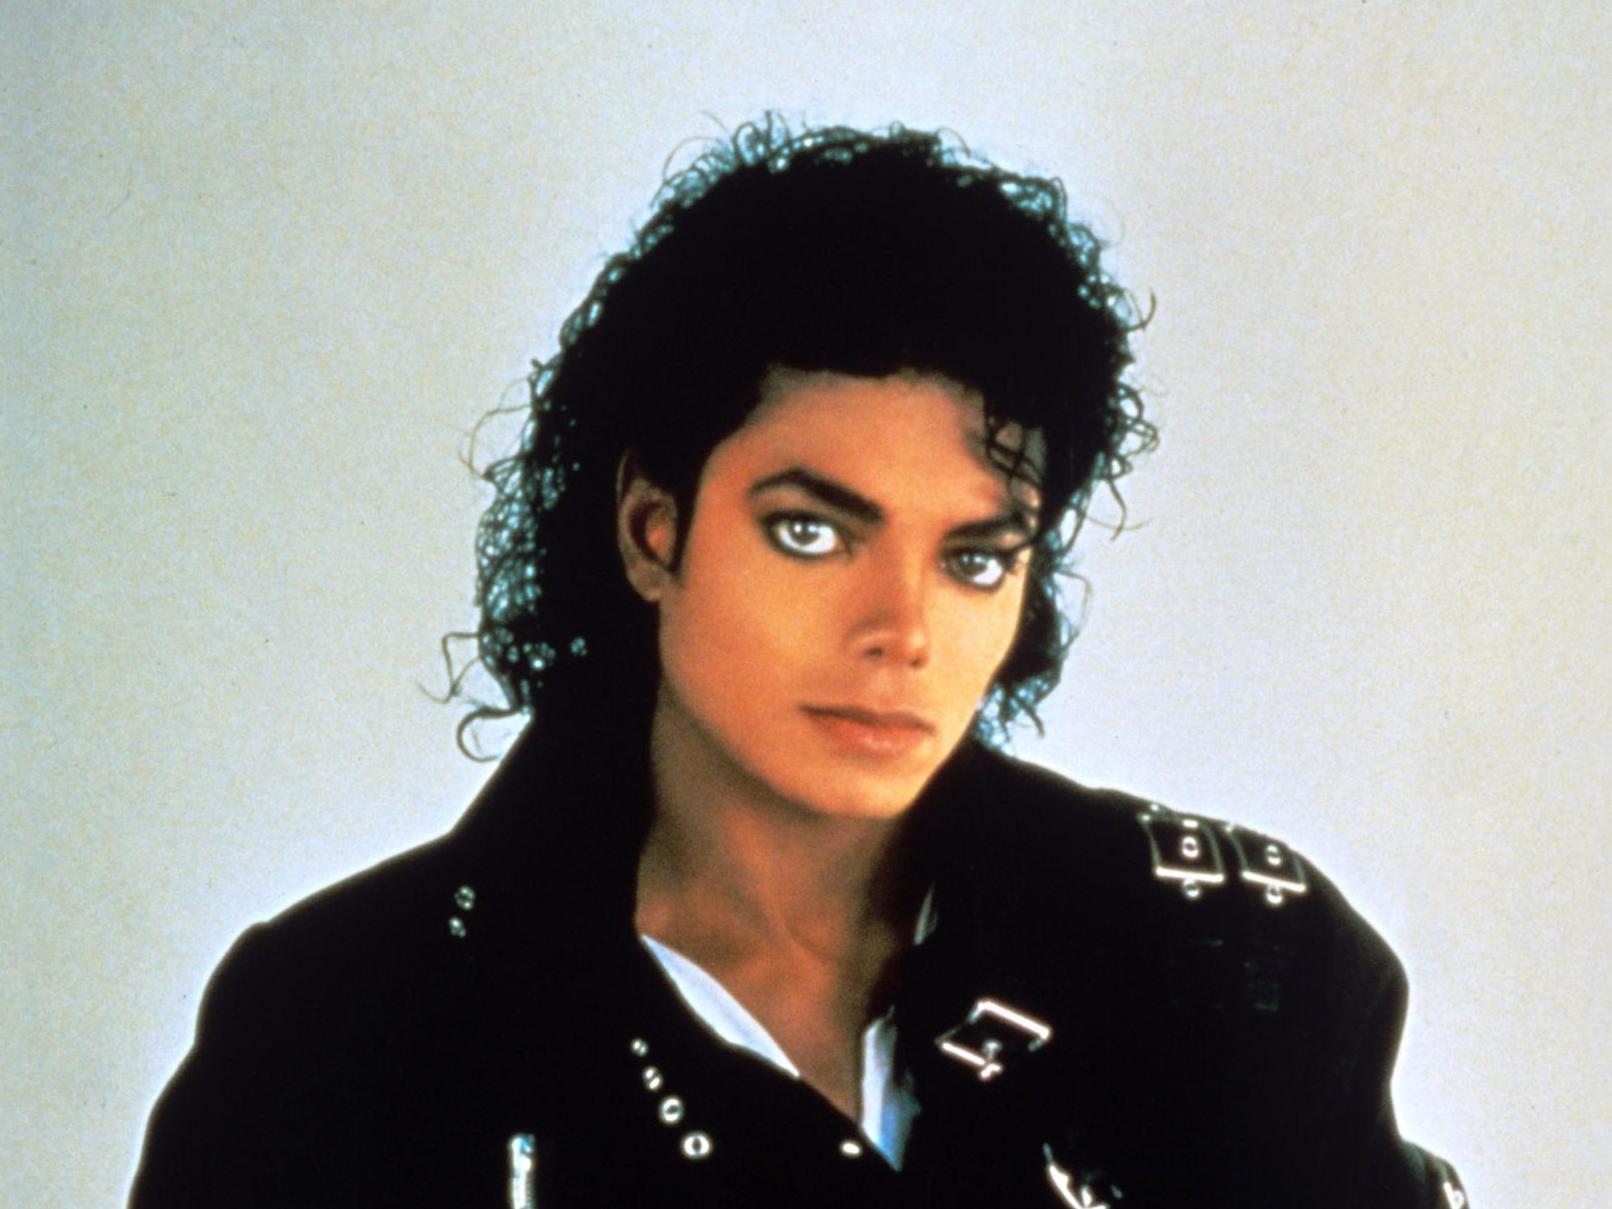 Tarnished legacy: Michael Jackson in 1987